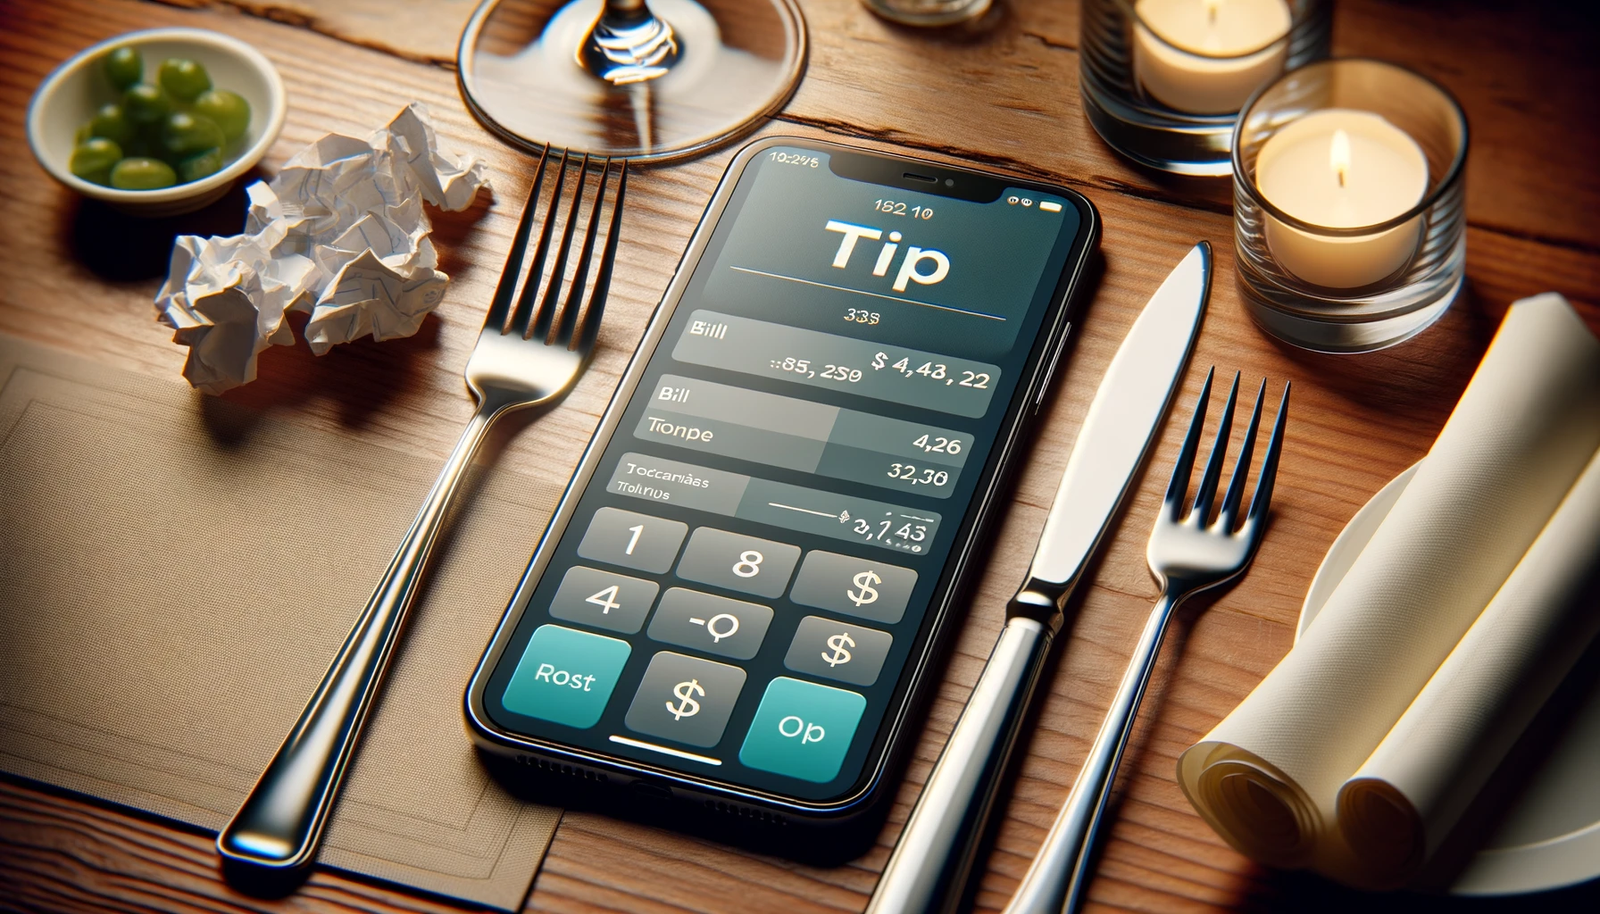 Tip Calculator: How to calculate tip?